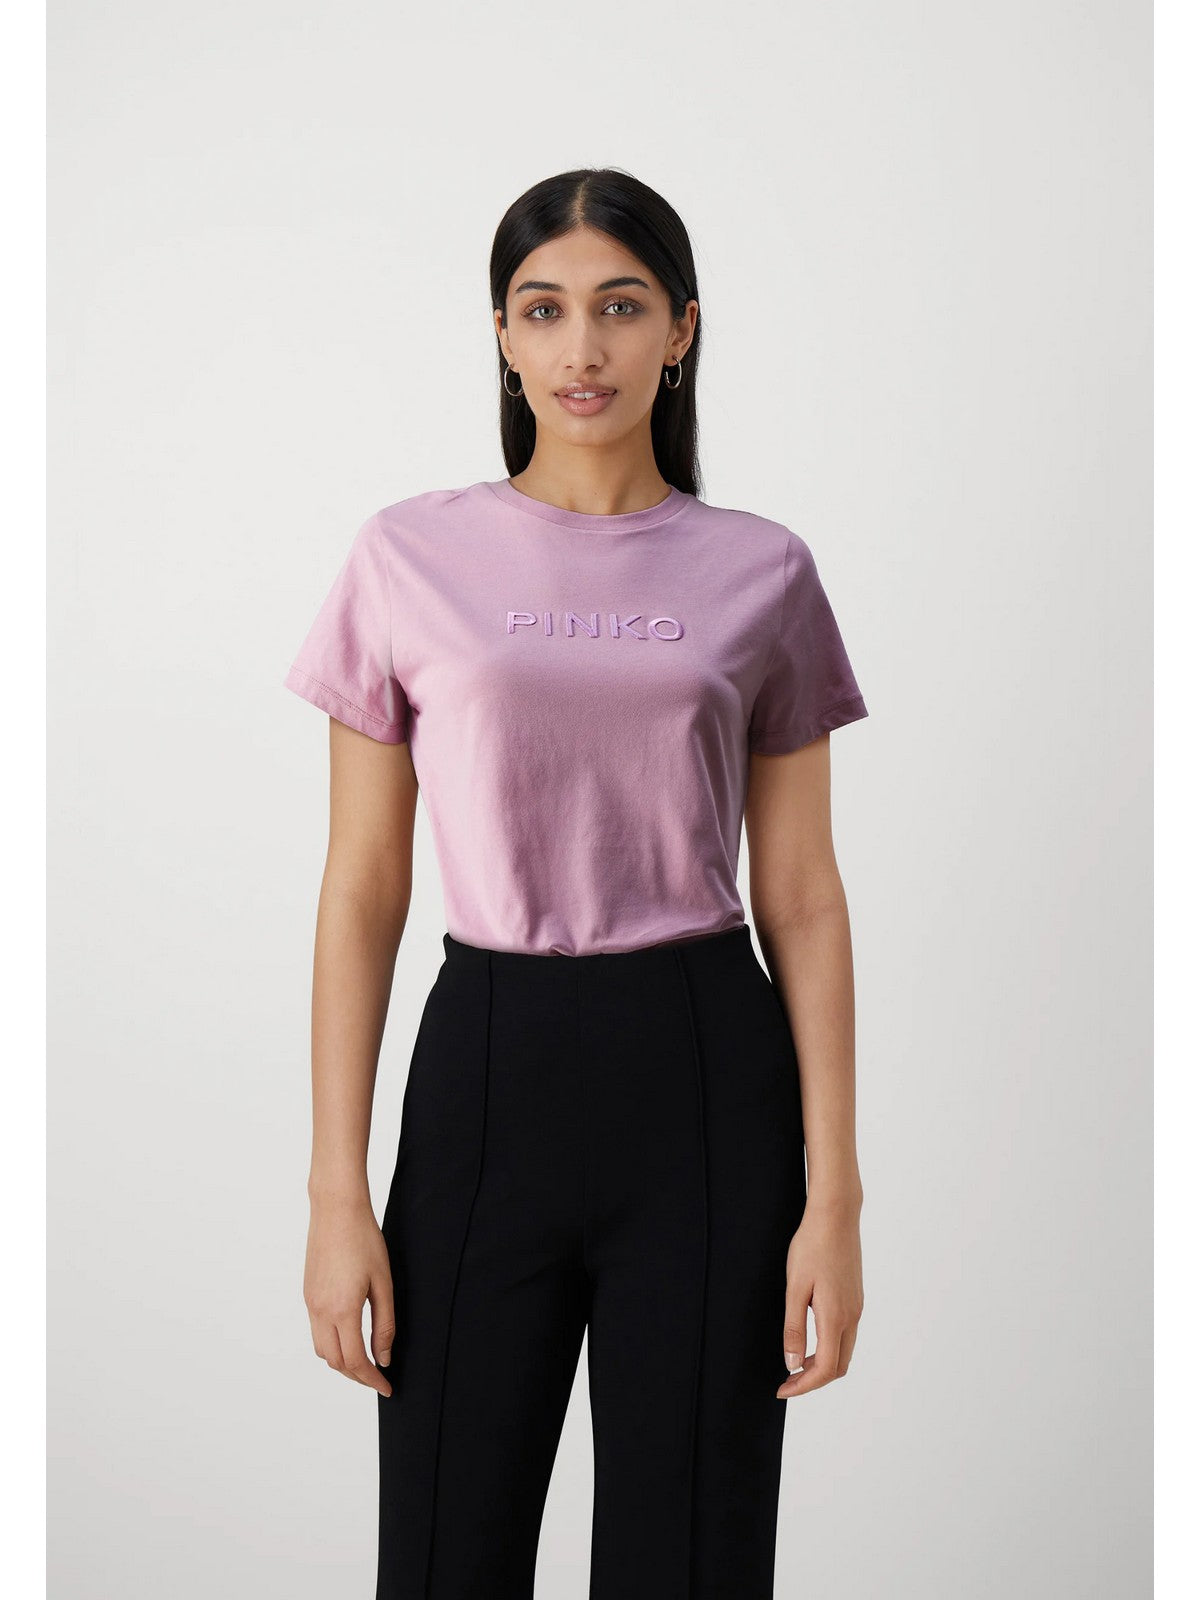 PINKO T-Shirt et Polo Start pour femmes 101752-A1NW N98 Pink